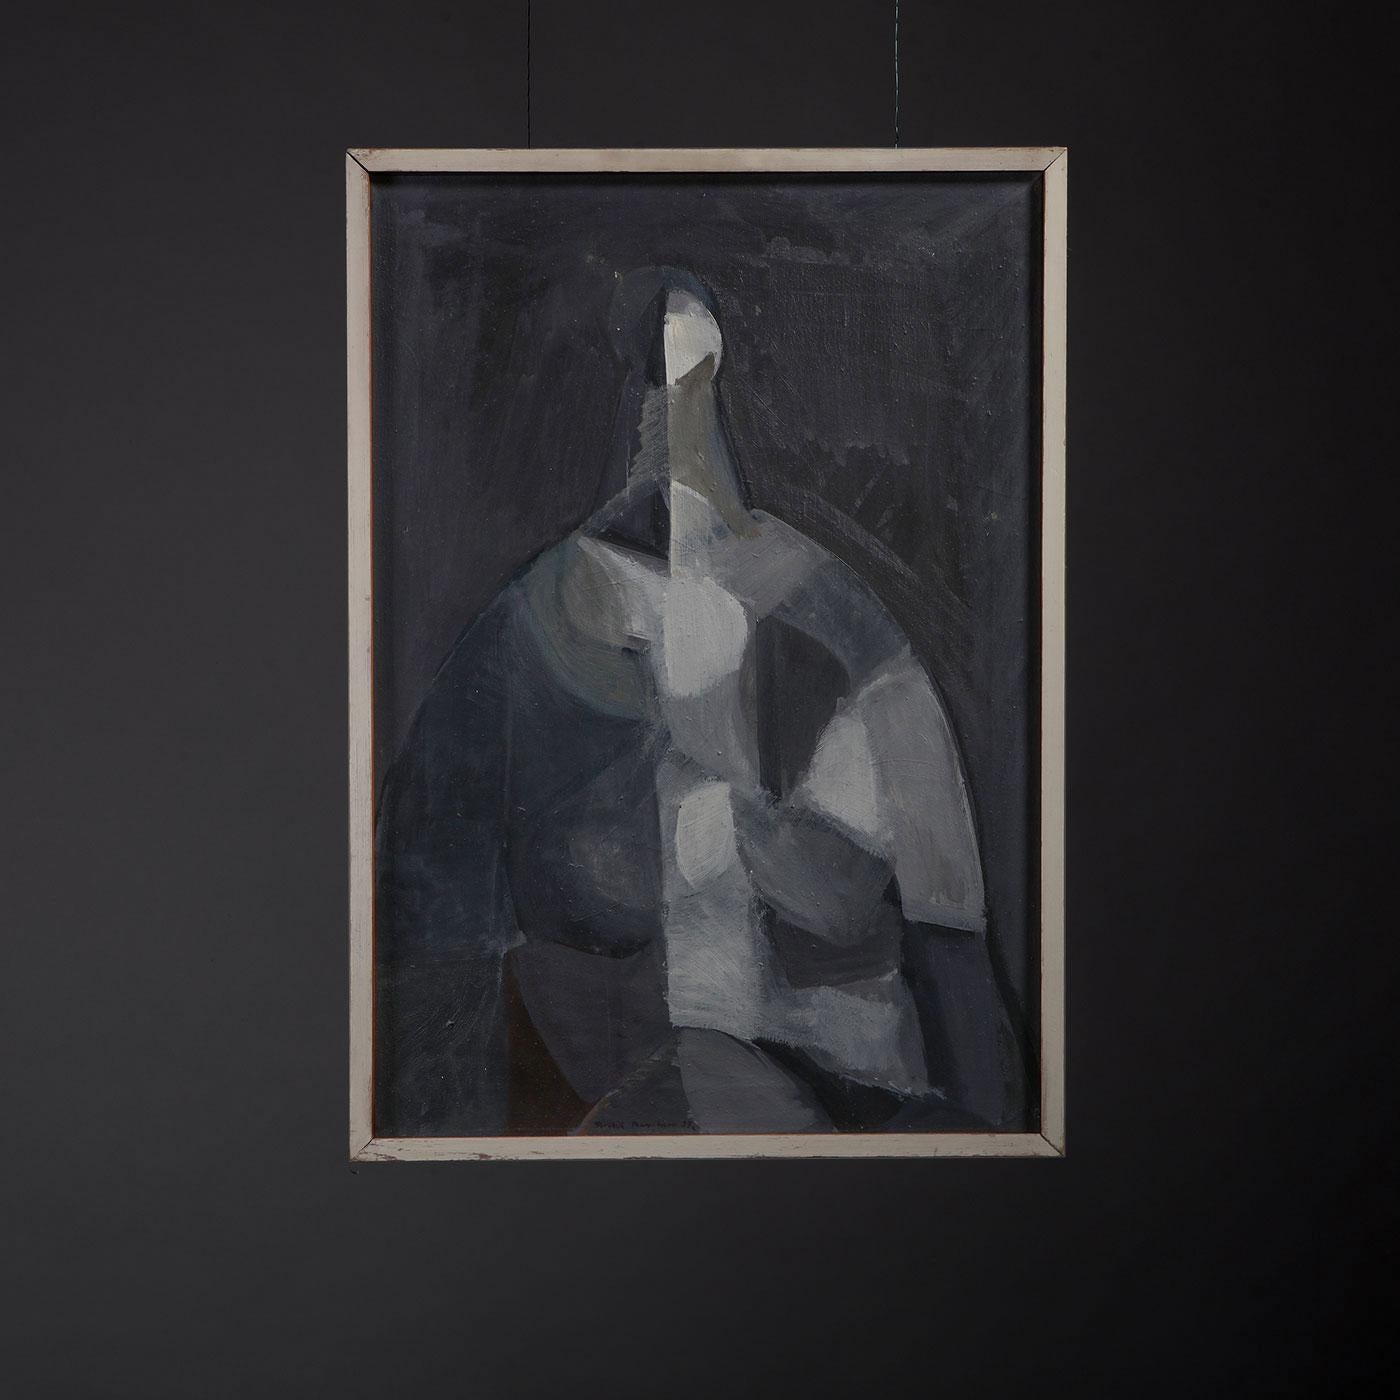 Abstract oil painting titled 'Woman IV' by Bertil Berntsson, Sweden, 1957.

A magnificent and rare abstract oil painting with its original pine frame titled 'Woman IV' composed by the sought-after Swedish artist Bertil Berntsson (1921-2002) in 1957,